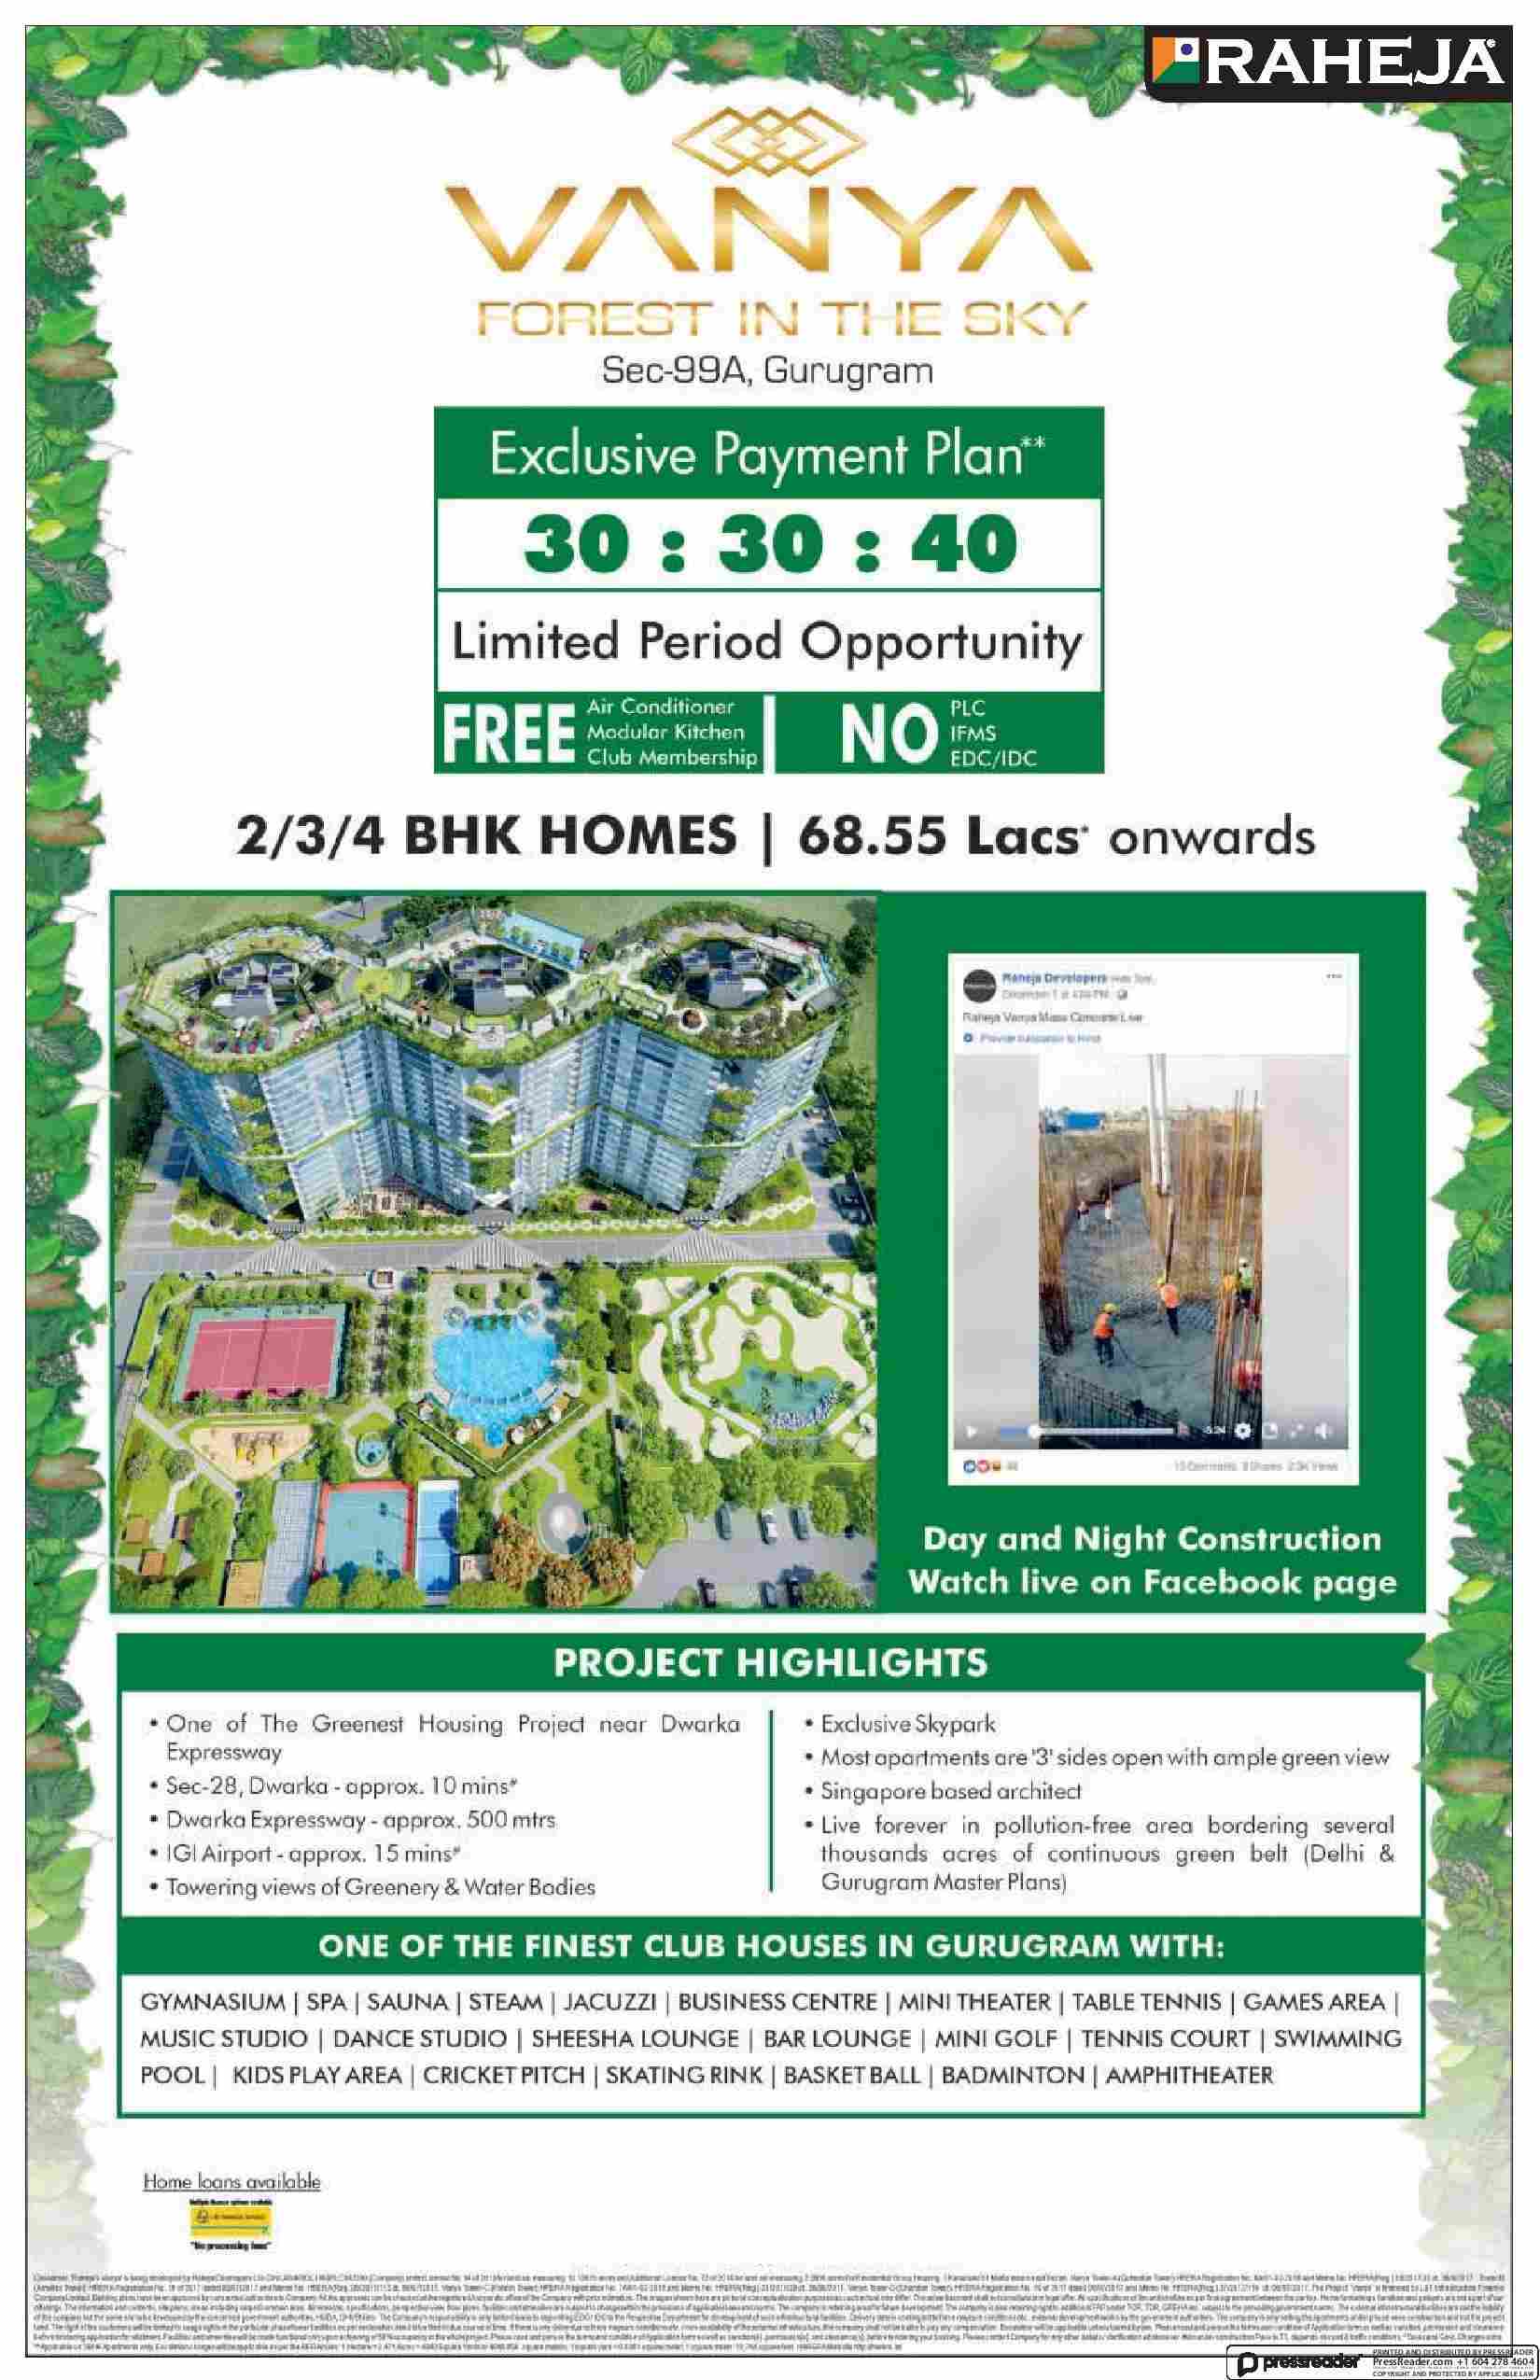 Avail exclusive 30:30:40 payment plan at Raheja Vanya in Sector 99A, Gurgaon Update